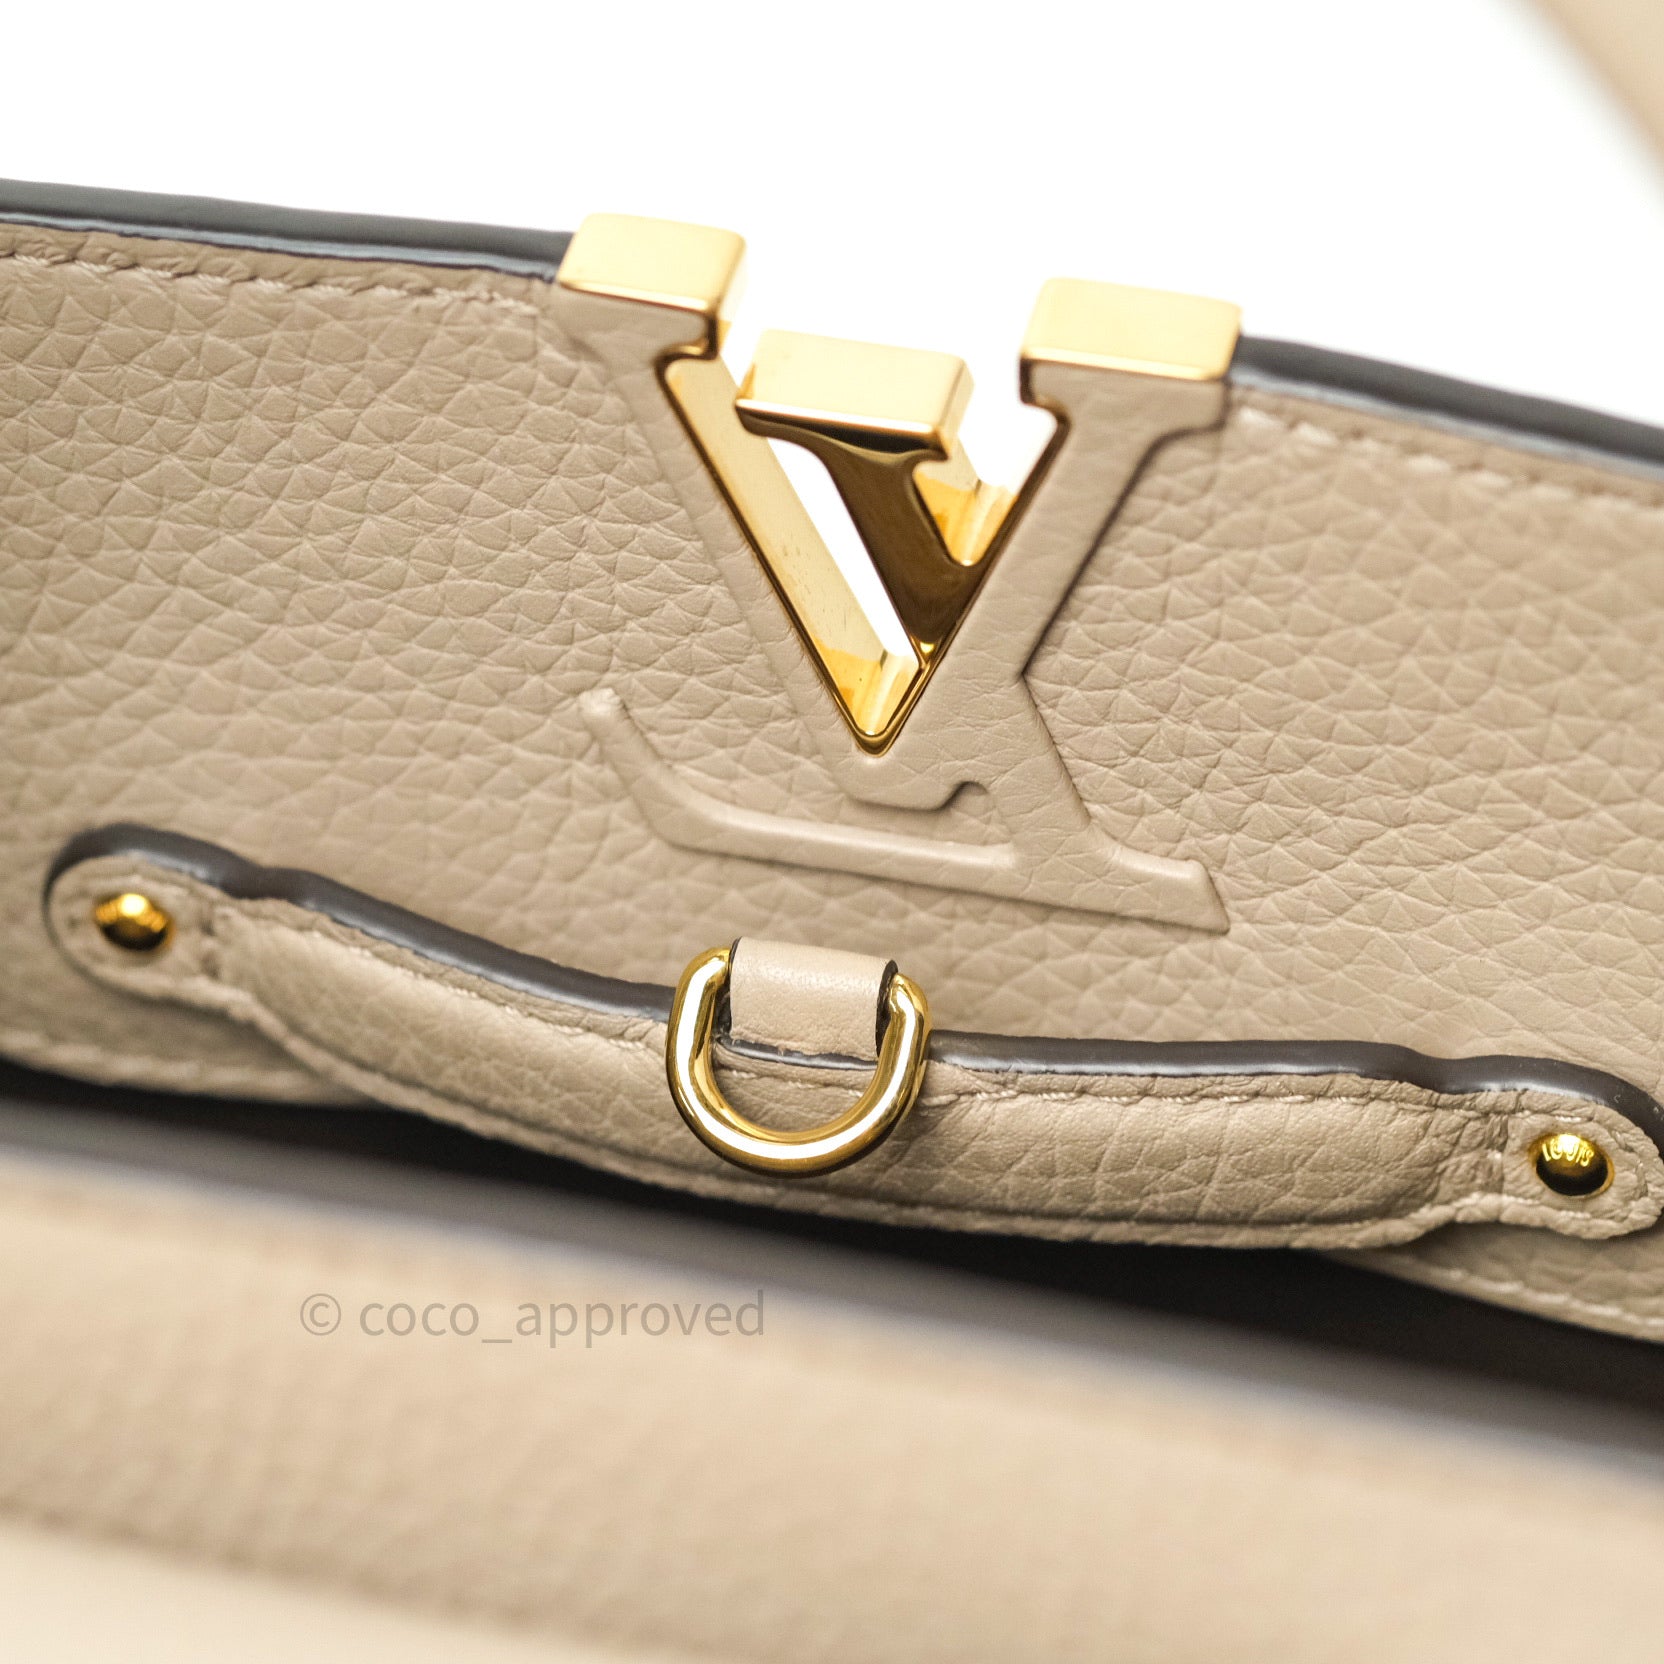 Louis Vuitton Taurillon Capucines BB Red Gold Hardware – Coco